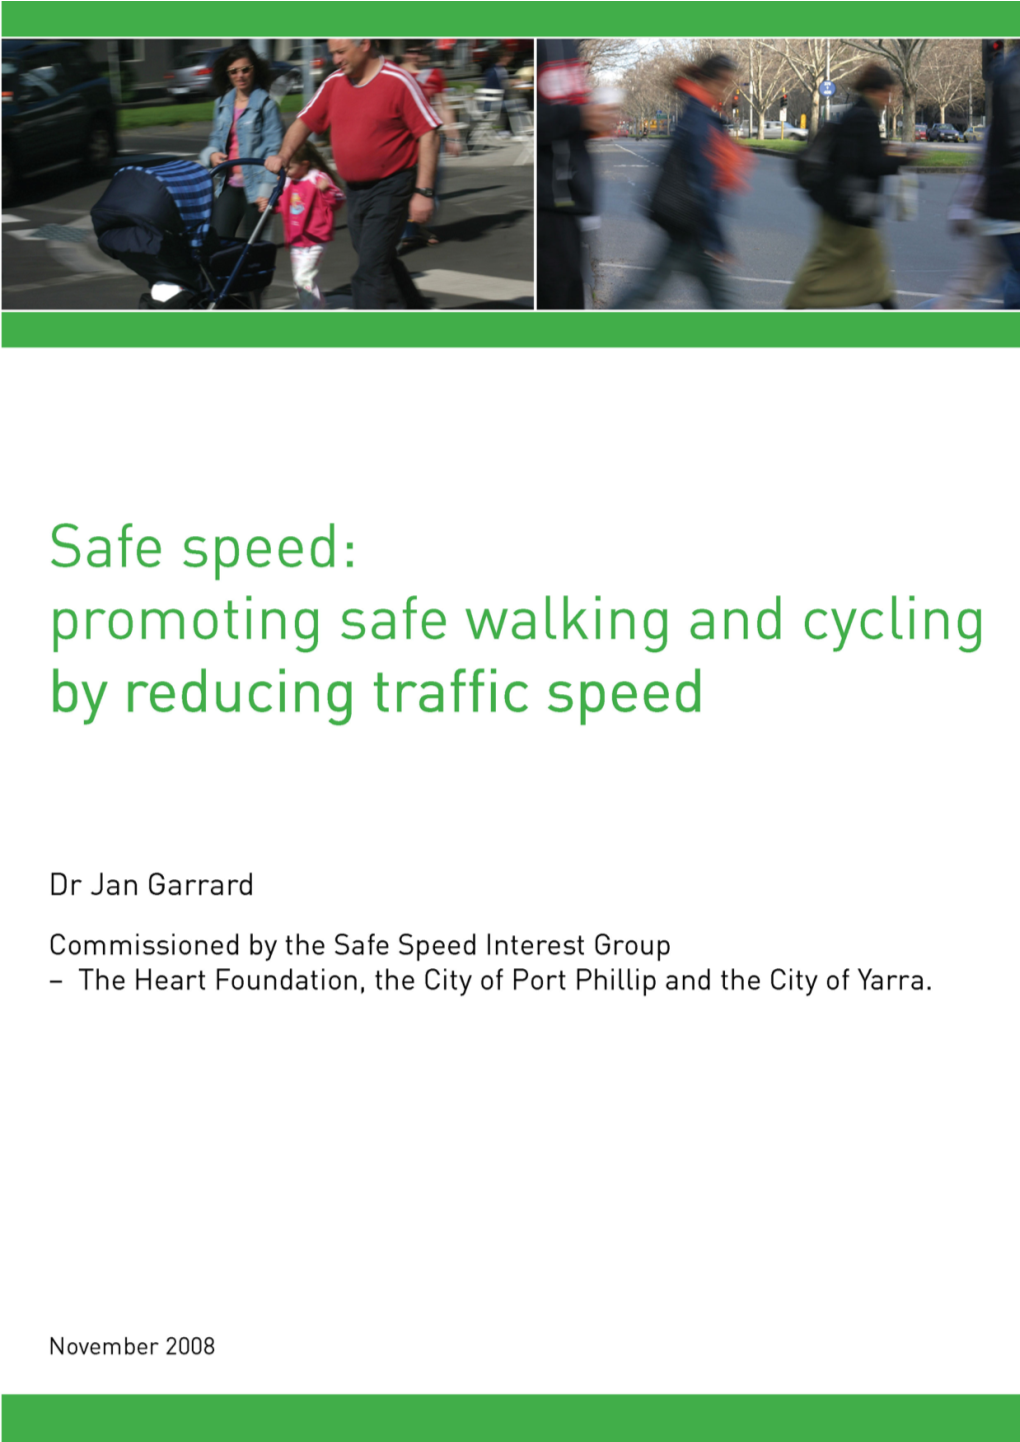 Safe Speed for All Road Users: Promoting Safe Walking and Cycling